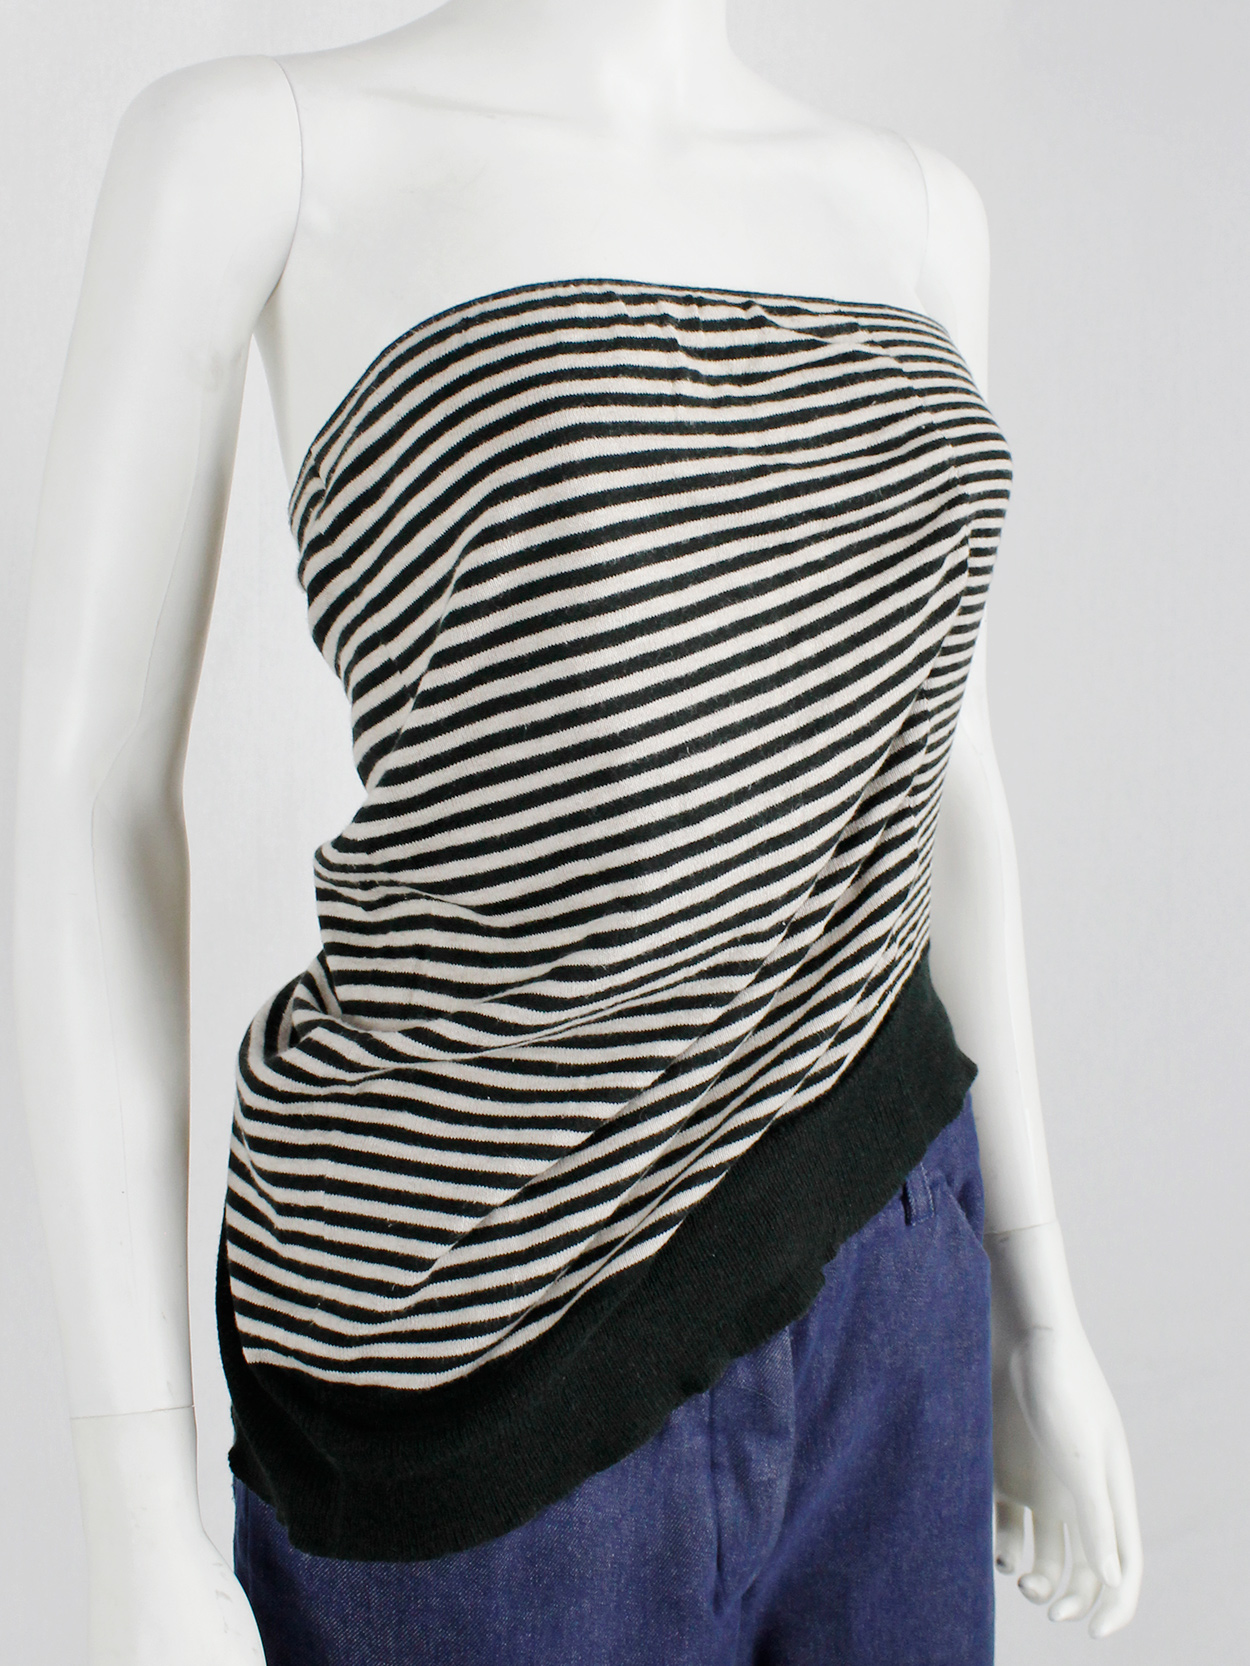 Maison Martin Margiela striped tube top stretched out on one side ...